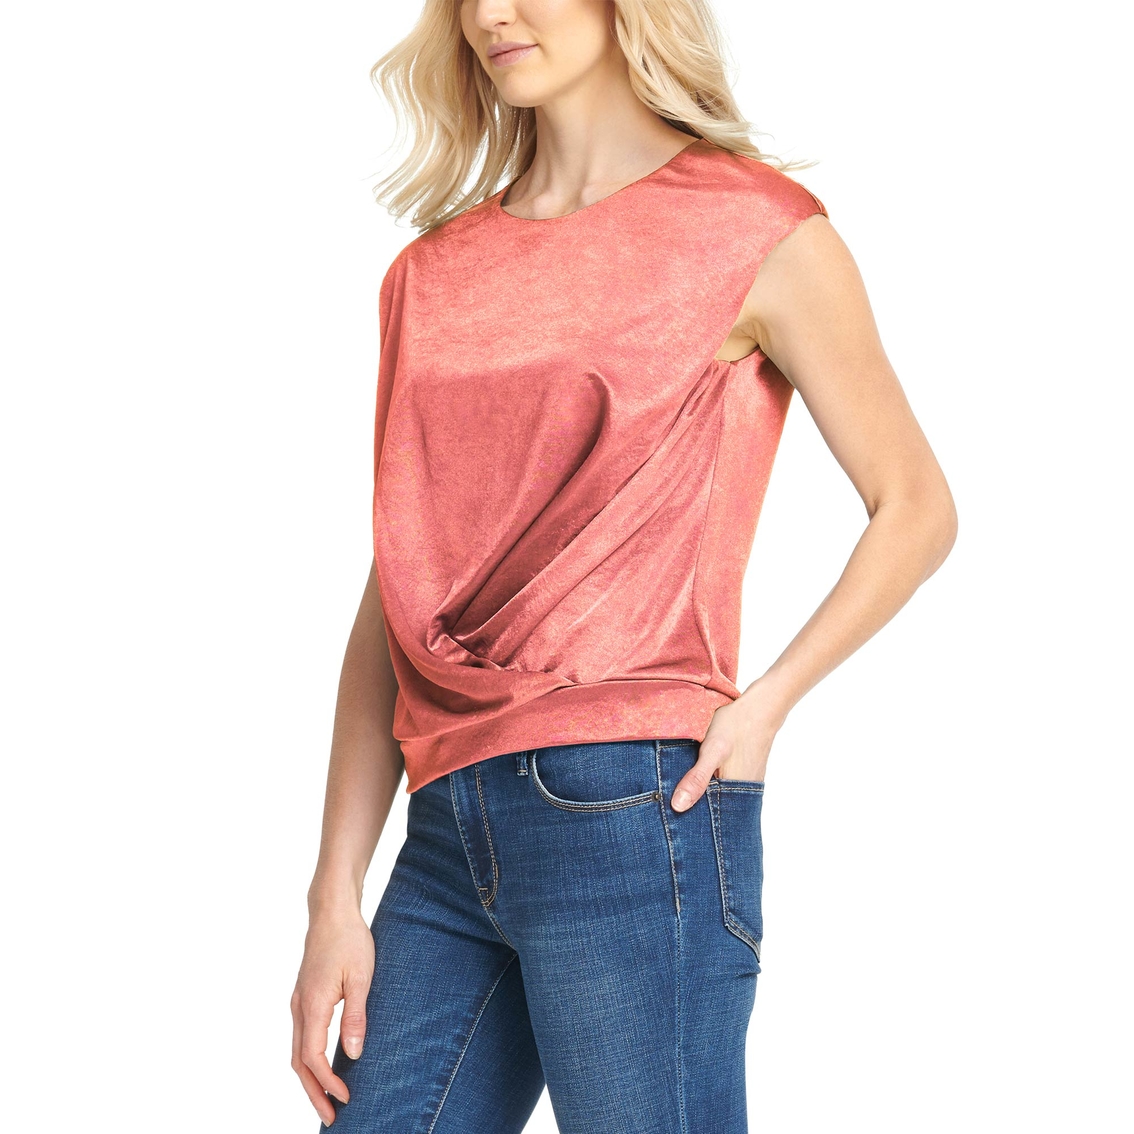 DKNY Cap Sleeve Knot Top - Image 3 of 3